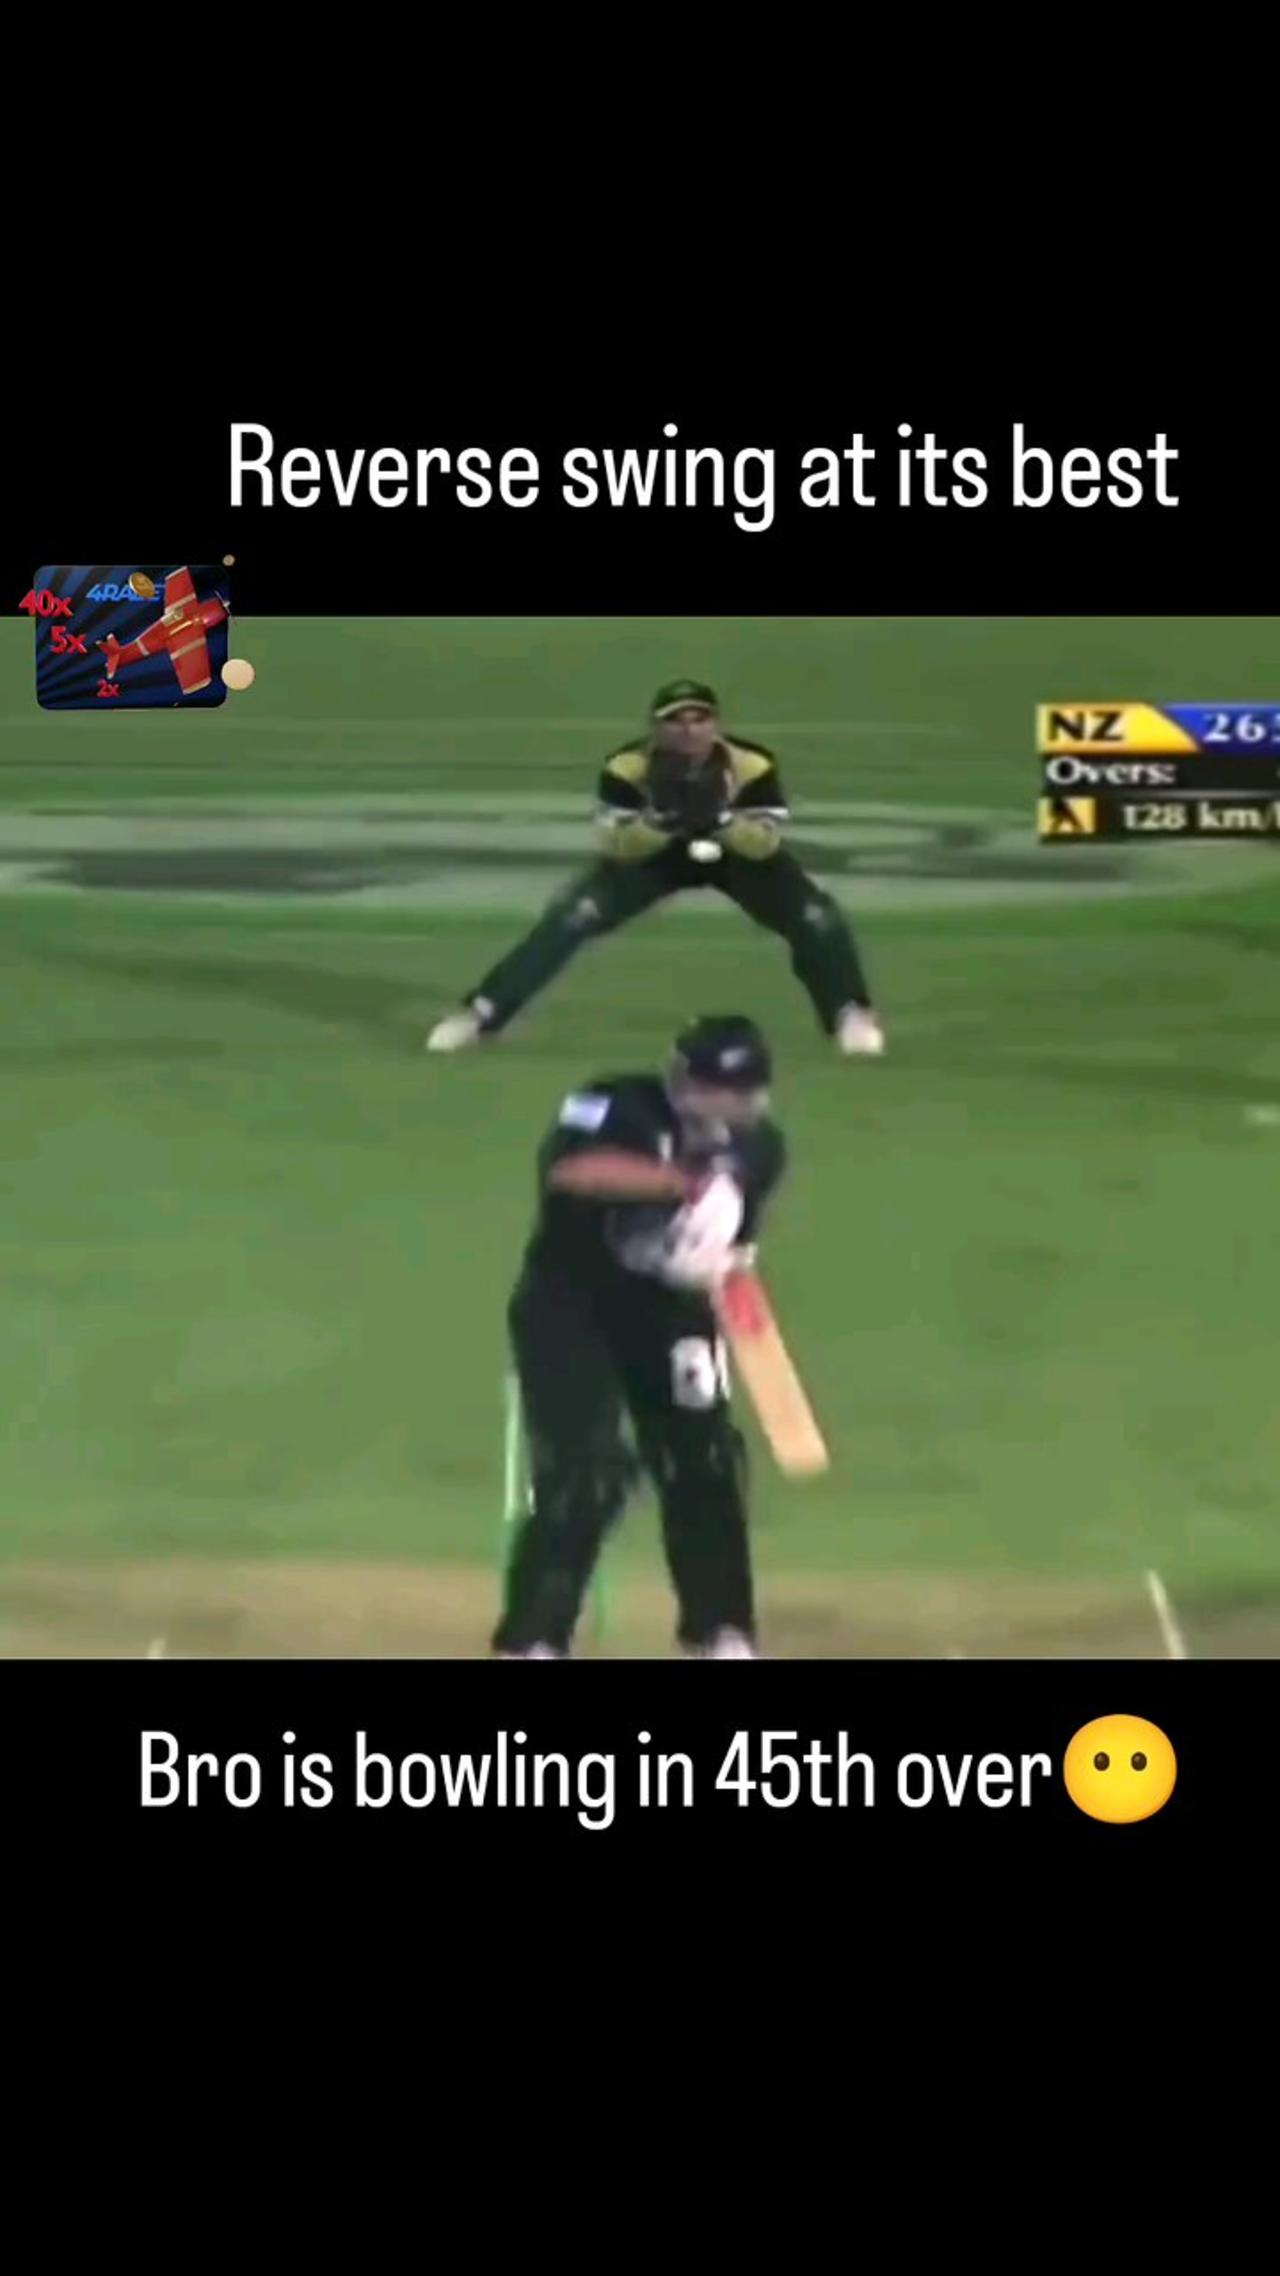 reverse swing at its very best / wasim akaram reverse swing bowling at 45 over